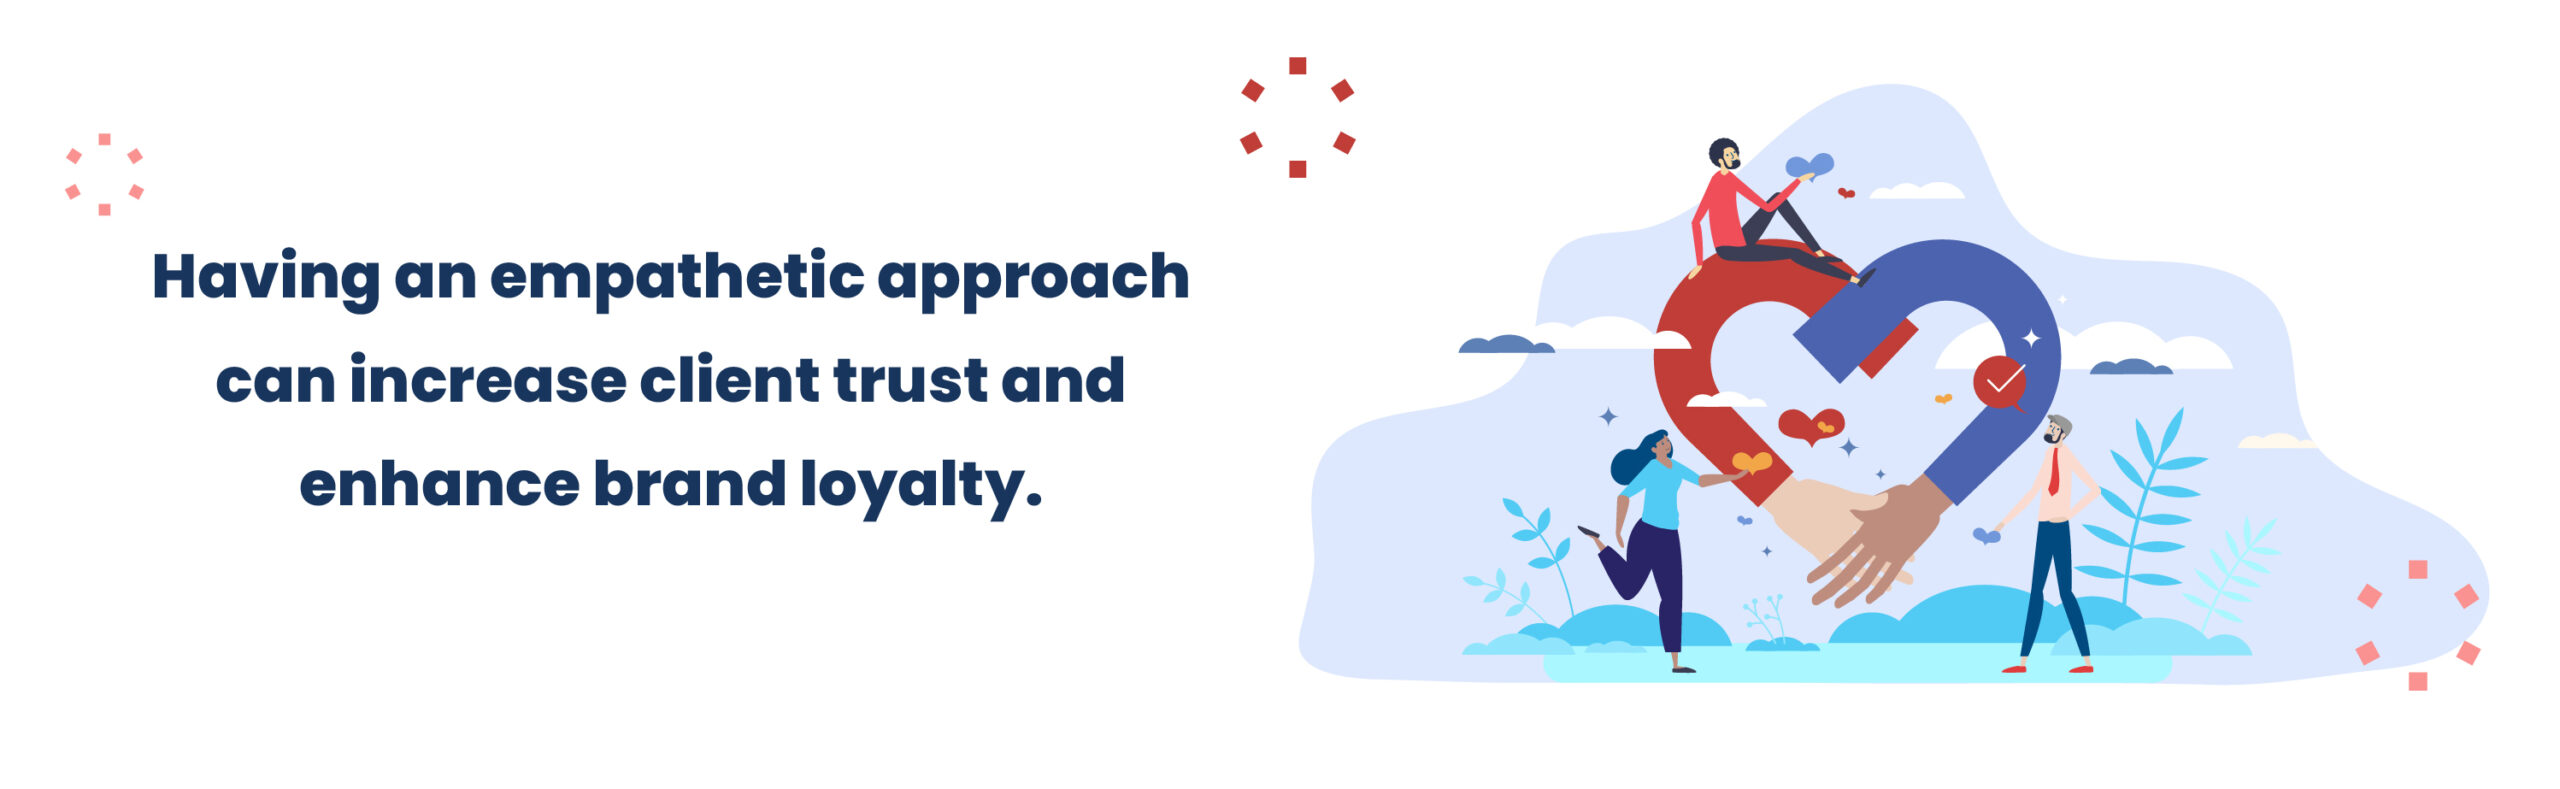 Having an empathetic approach can increase client trust and enhance brand loyalty.